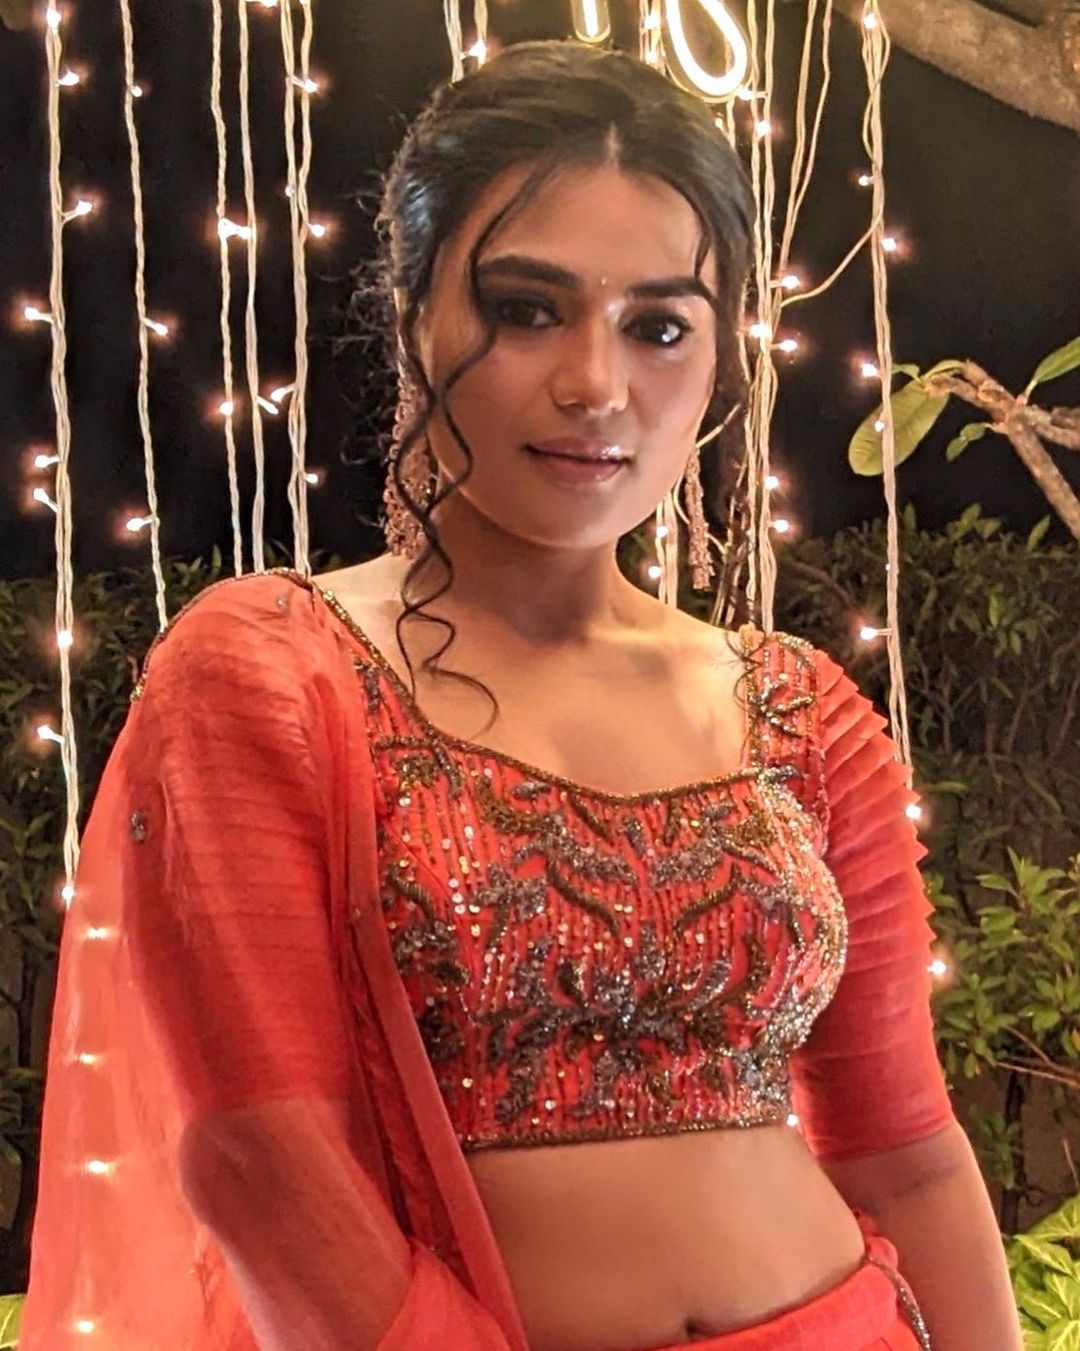 Actress Renee Dhyani Is Known For Her Role In The Popular Serial Aapki Nazron Ne Samjha. Renee Said She Did Her Diwali Shopping From Sarojini Nagar